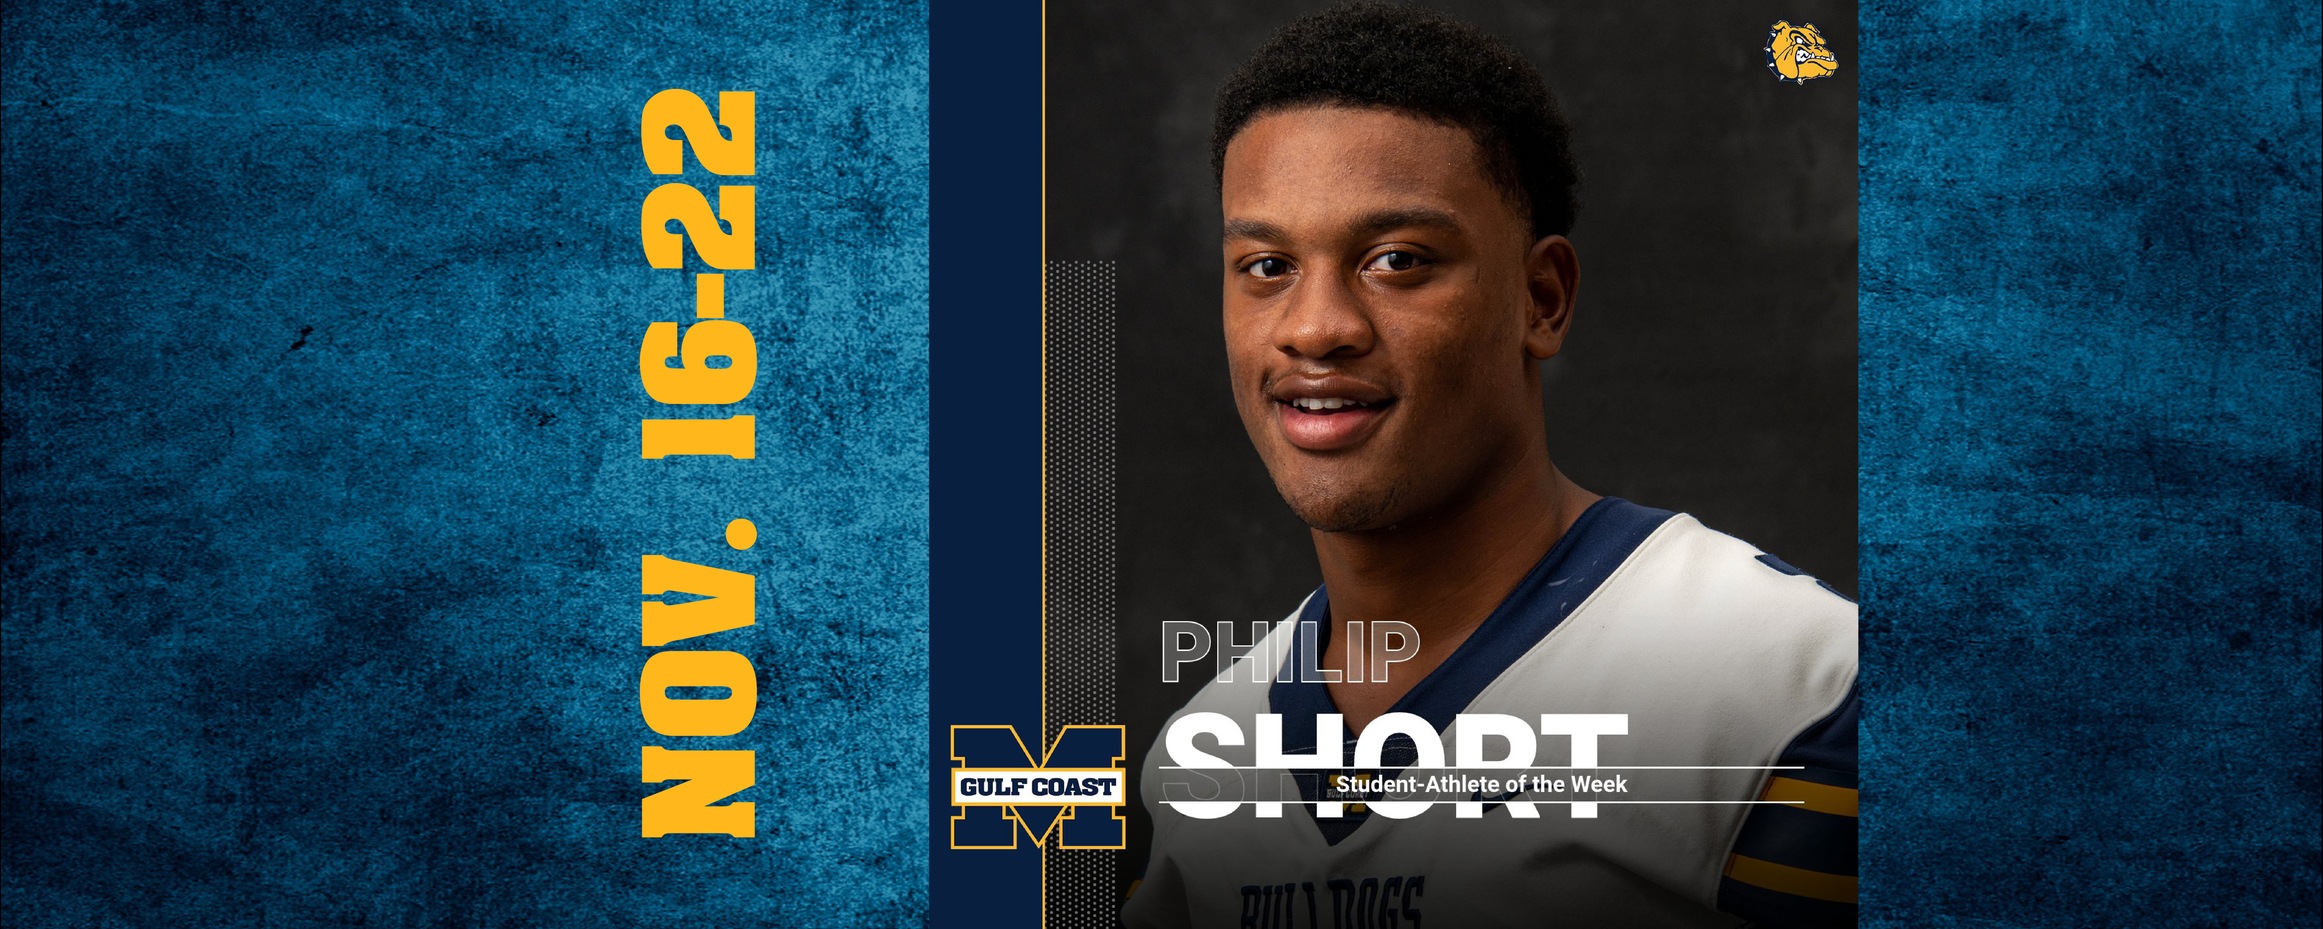 Short named MGCCC Student-Athlete of the Week